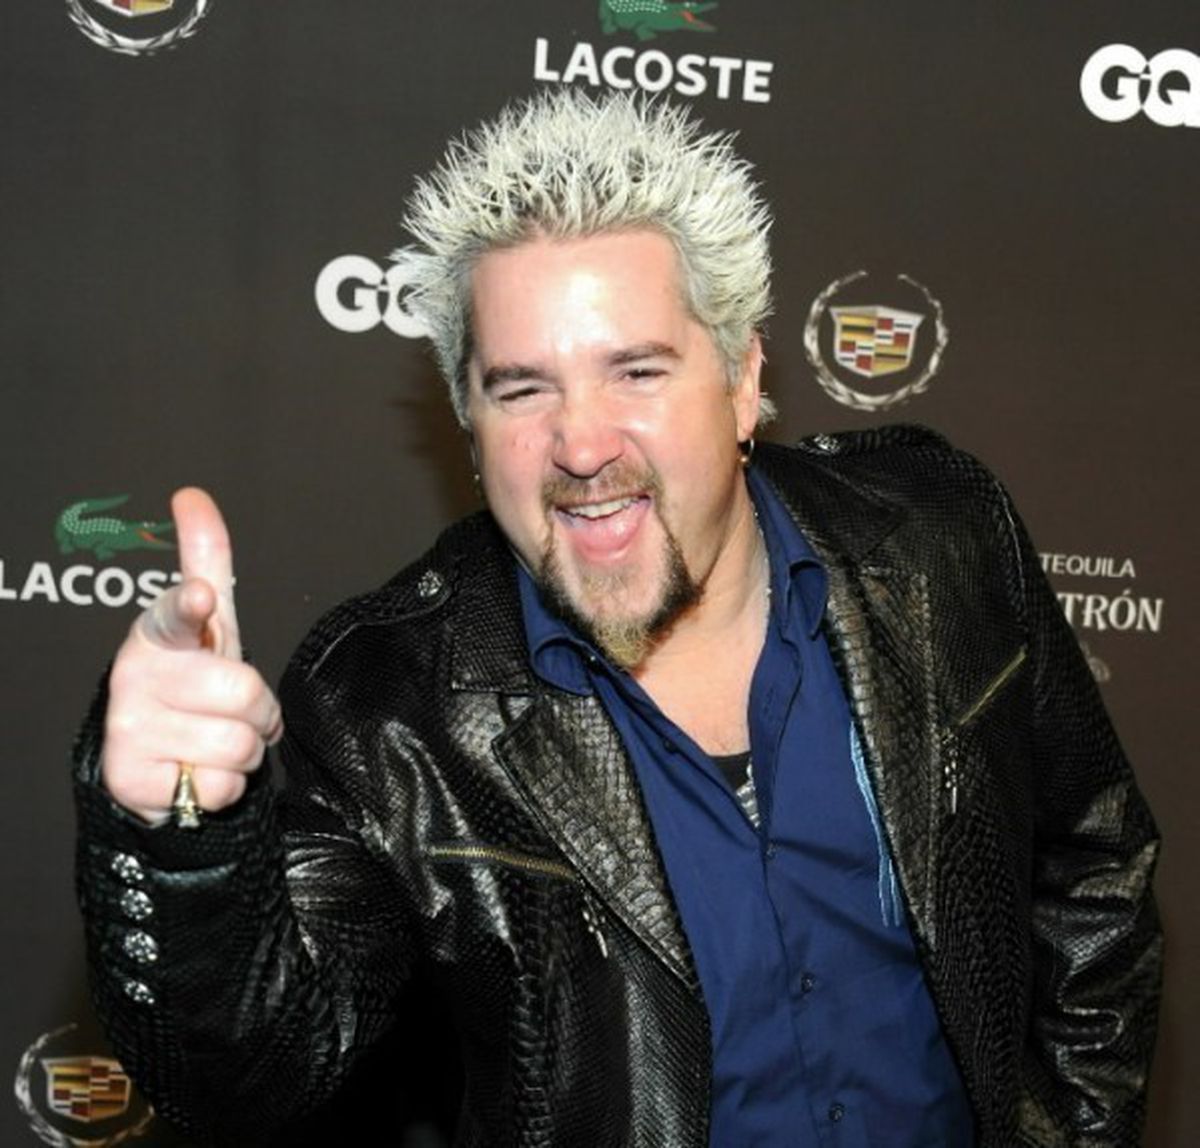 GUY FIERI - RAISES 21.5 MILLION TO SAVE SMALL BUSINESS RESTAURANTS WHILE CONGRESS VACATIONS!